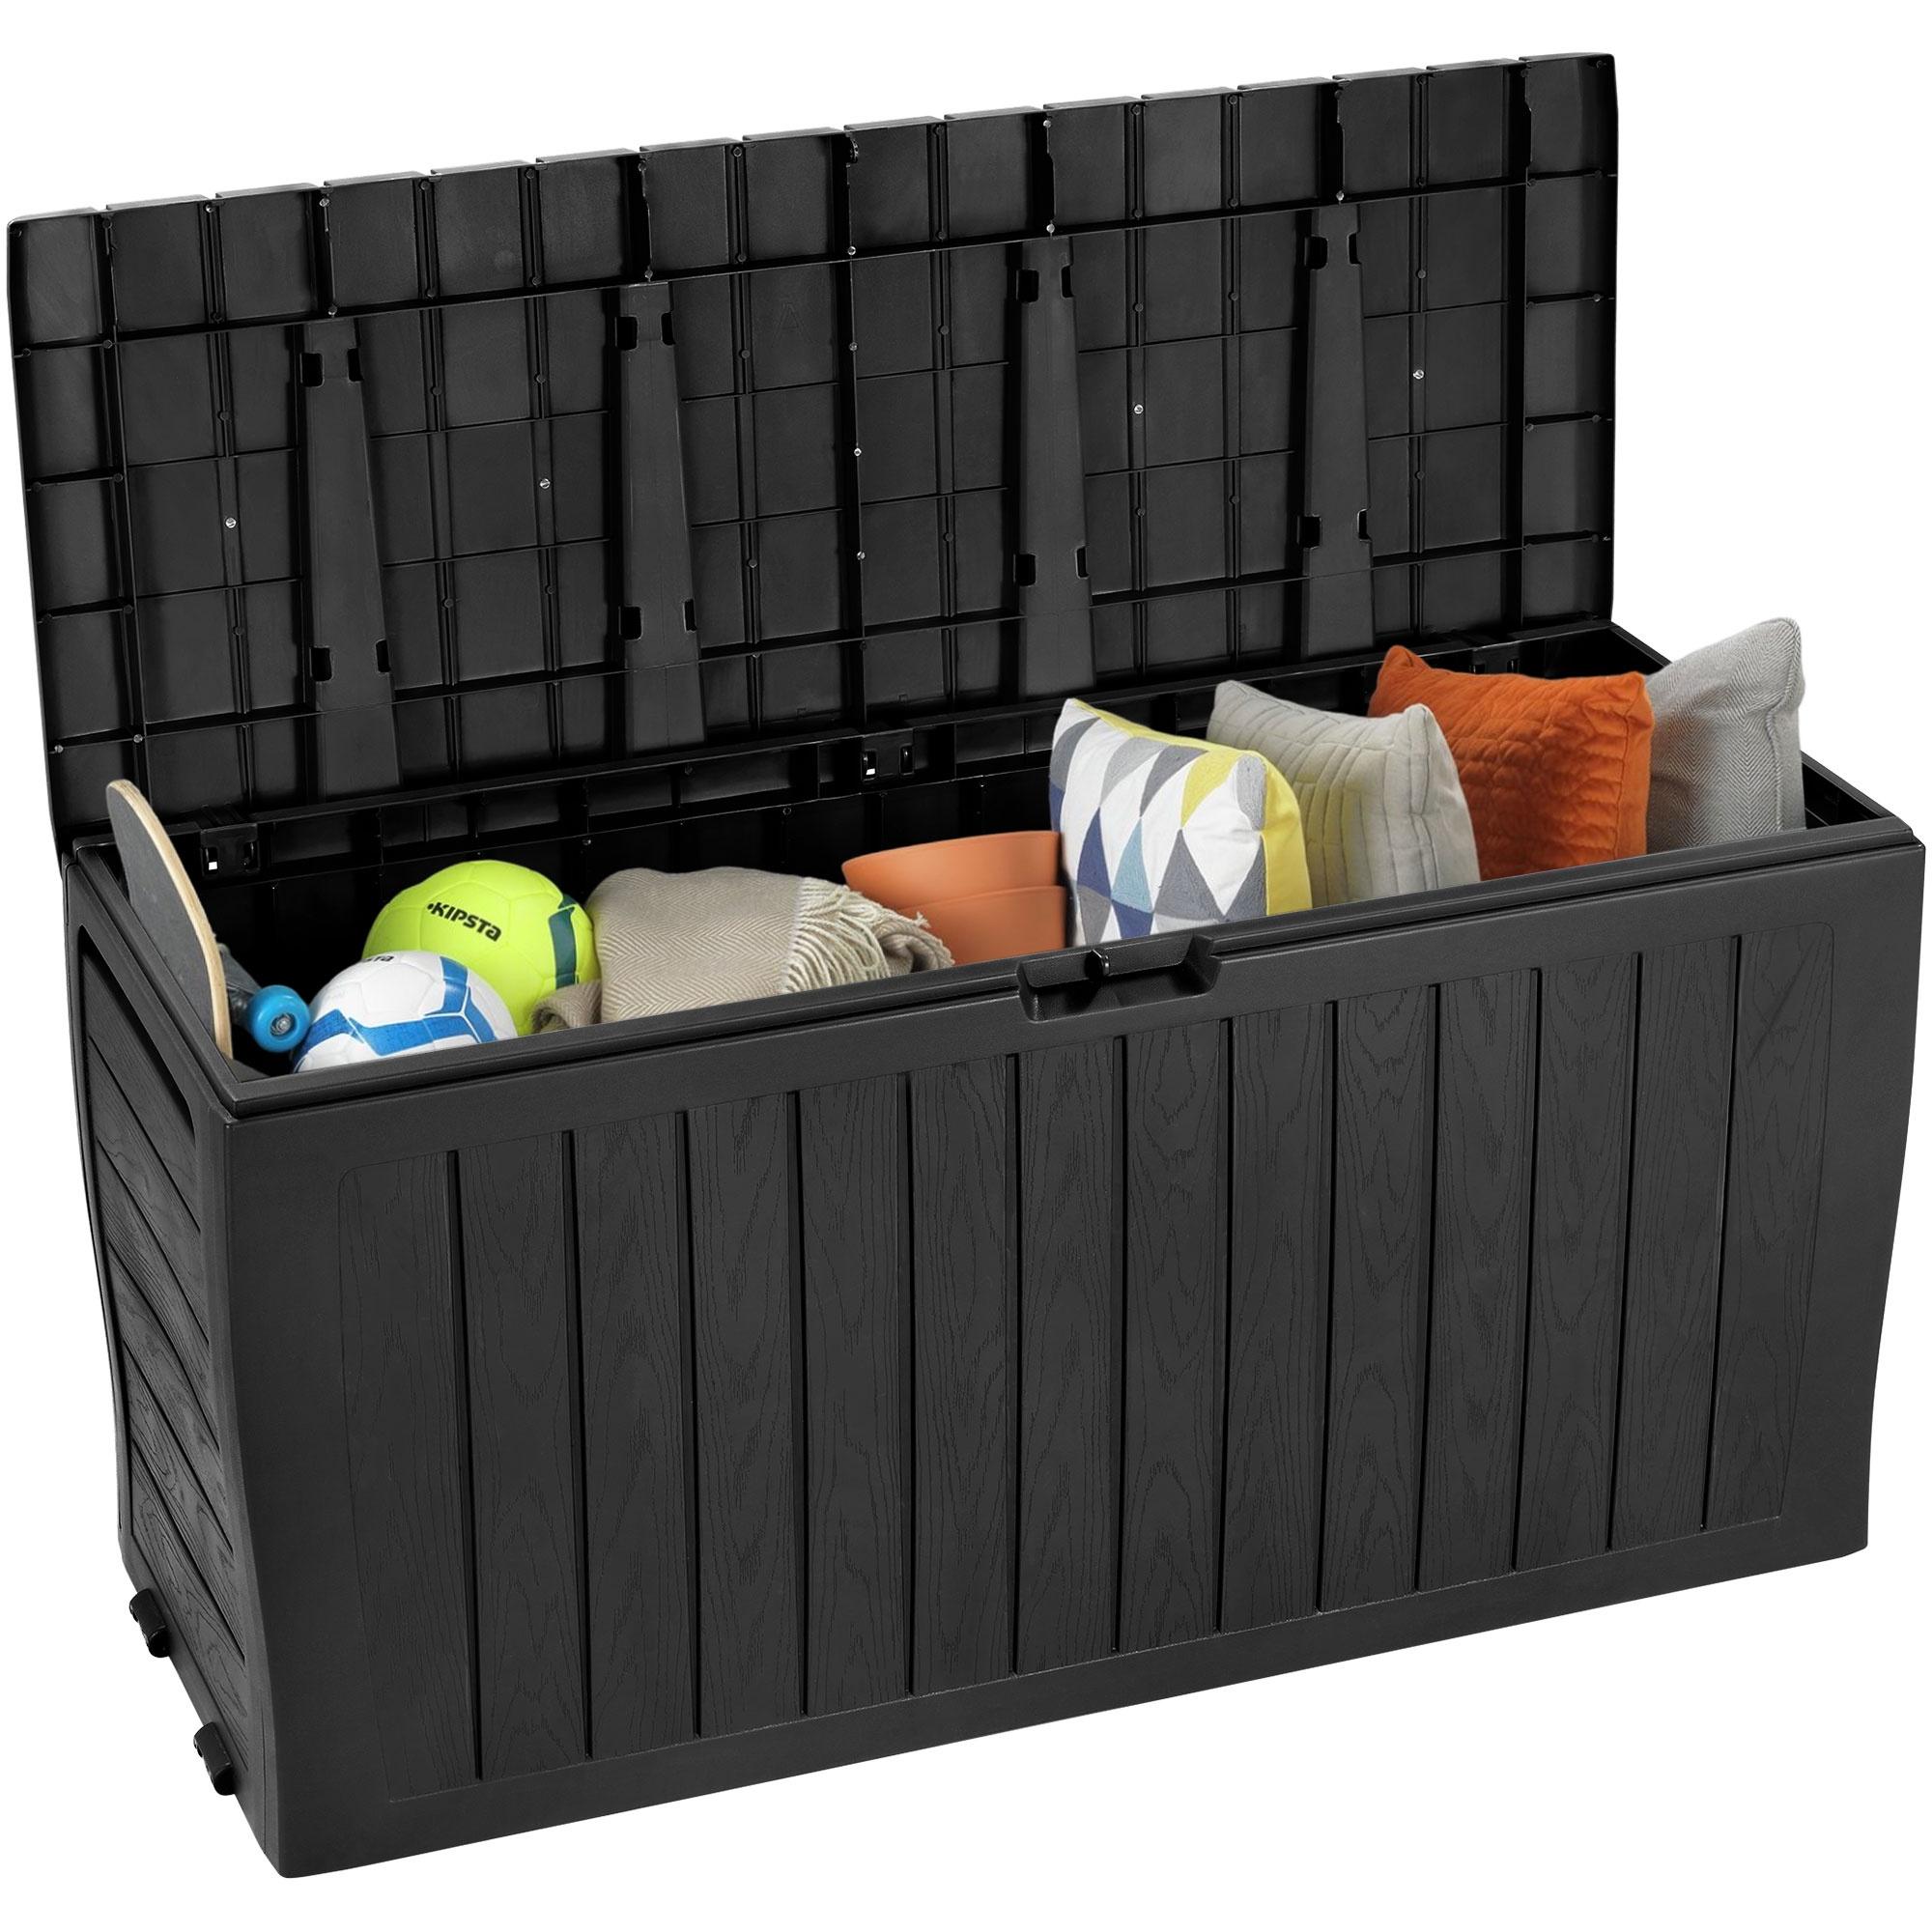 Seizeen 75 Gallon Resin Deck Box on Wheels, Patio Large Storage Cabinet, Outdoor Waterproof Storage Chest, Storage Container for Outside Furniture Cushions, Garden Tools, Kids' Toys, Black, D7226 - image 1 of 11